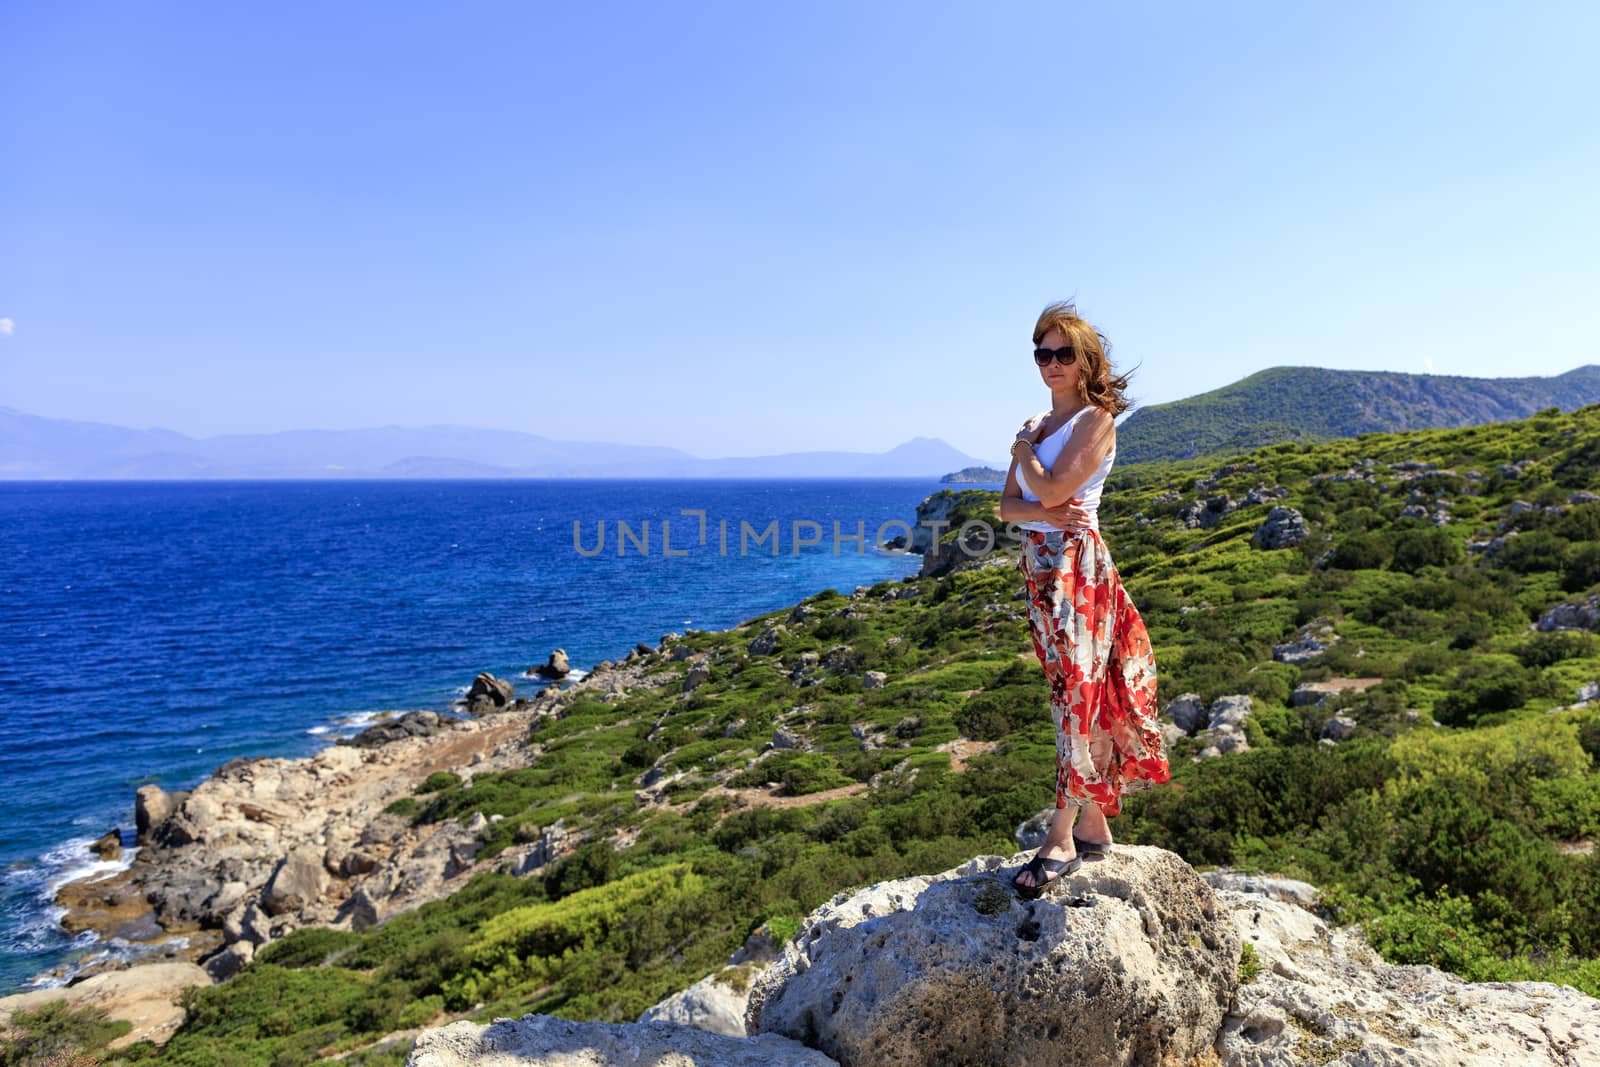 A beautiful lady stands on a large stone boulder against the background of the coastline of the Ionian Sea. by Sergii